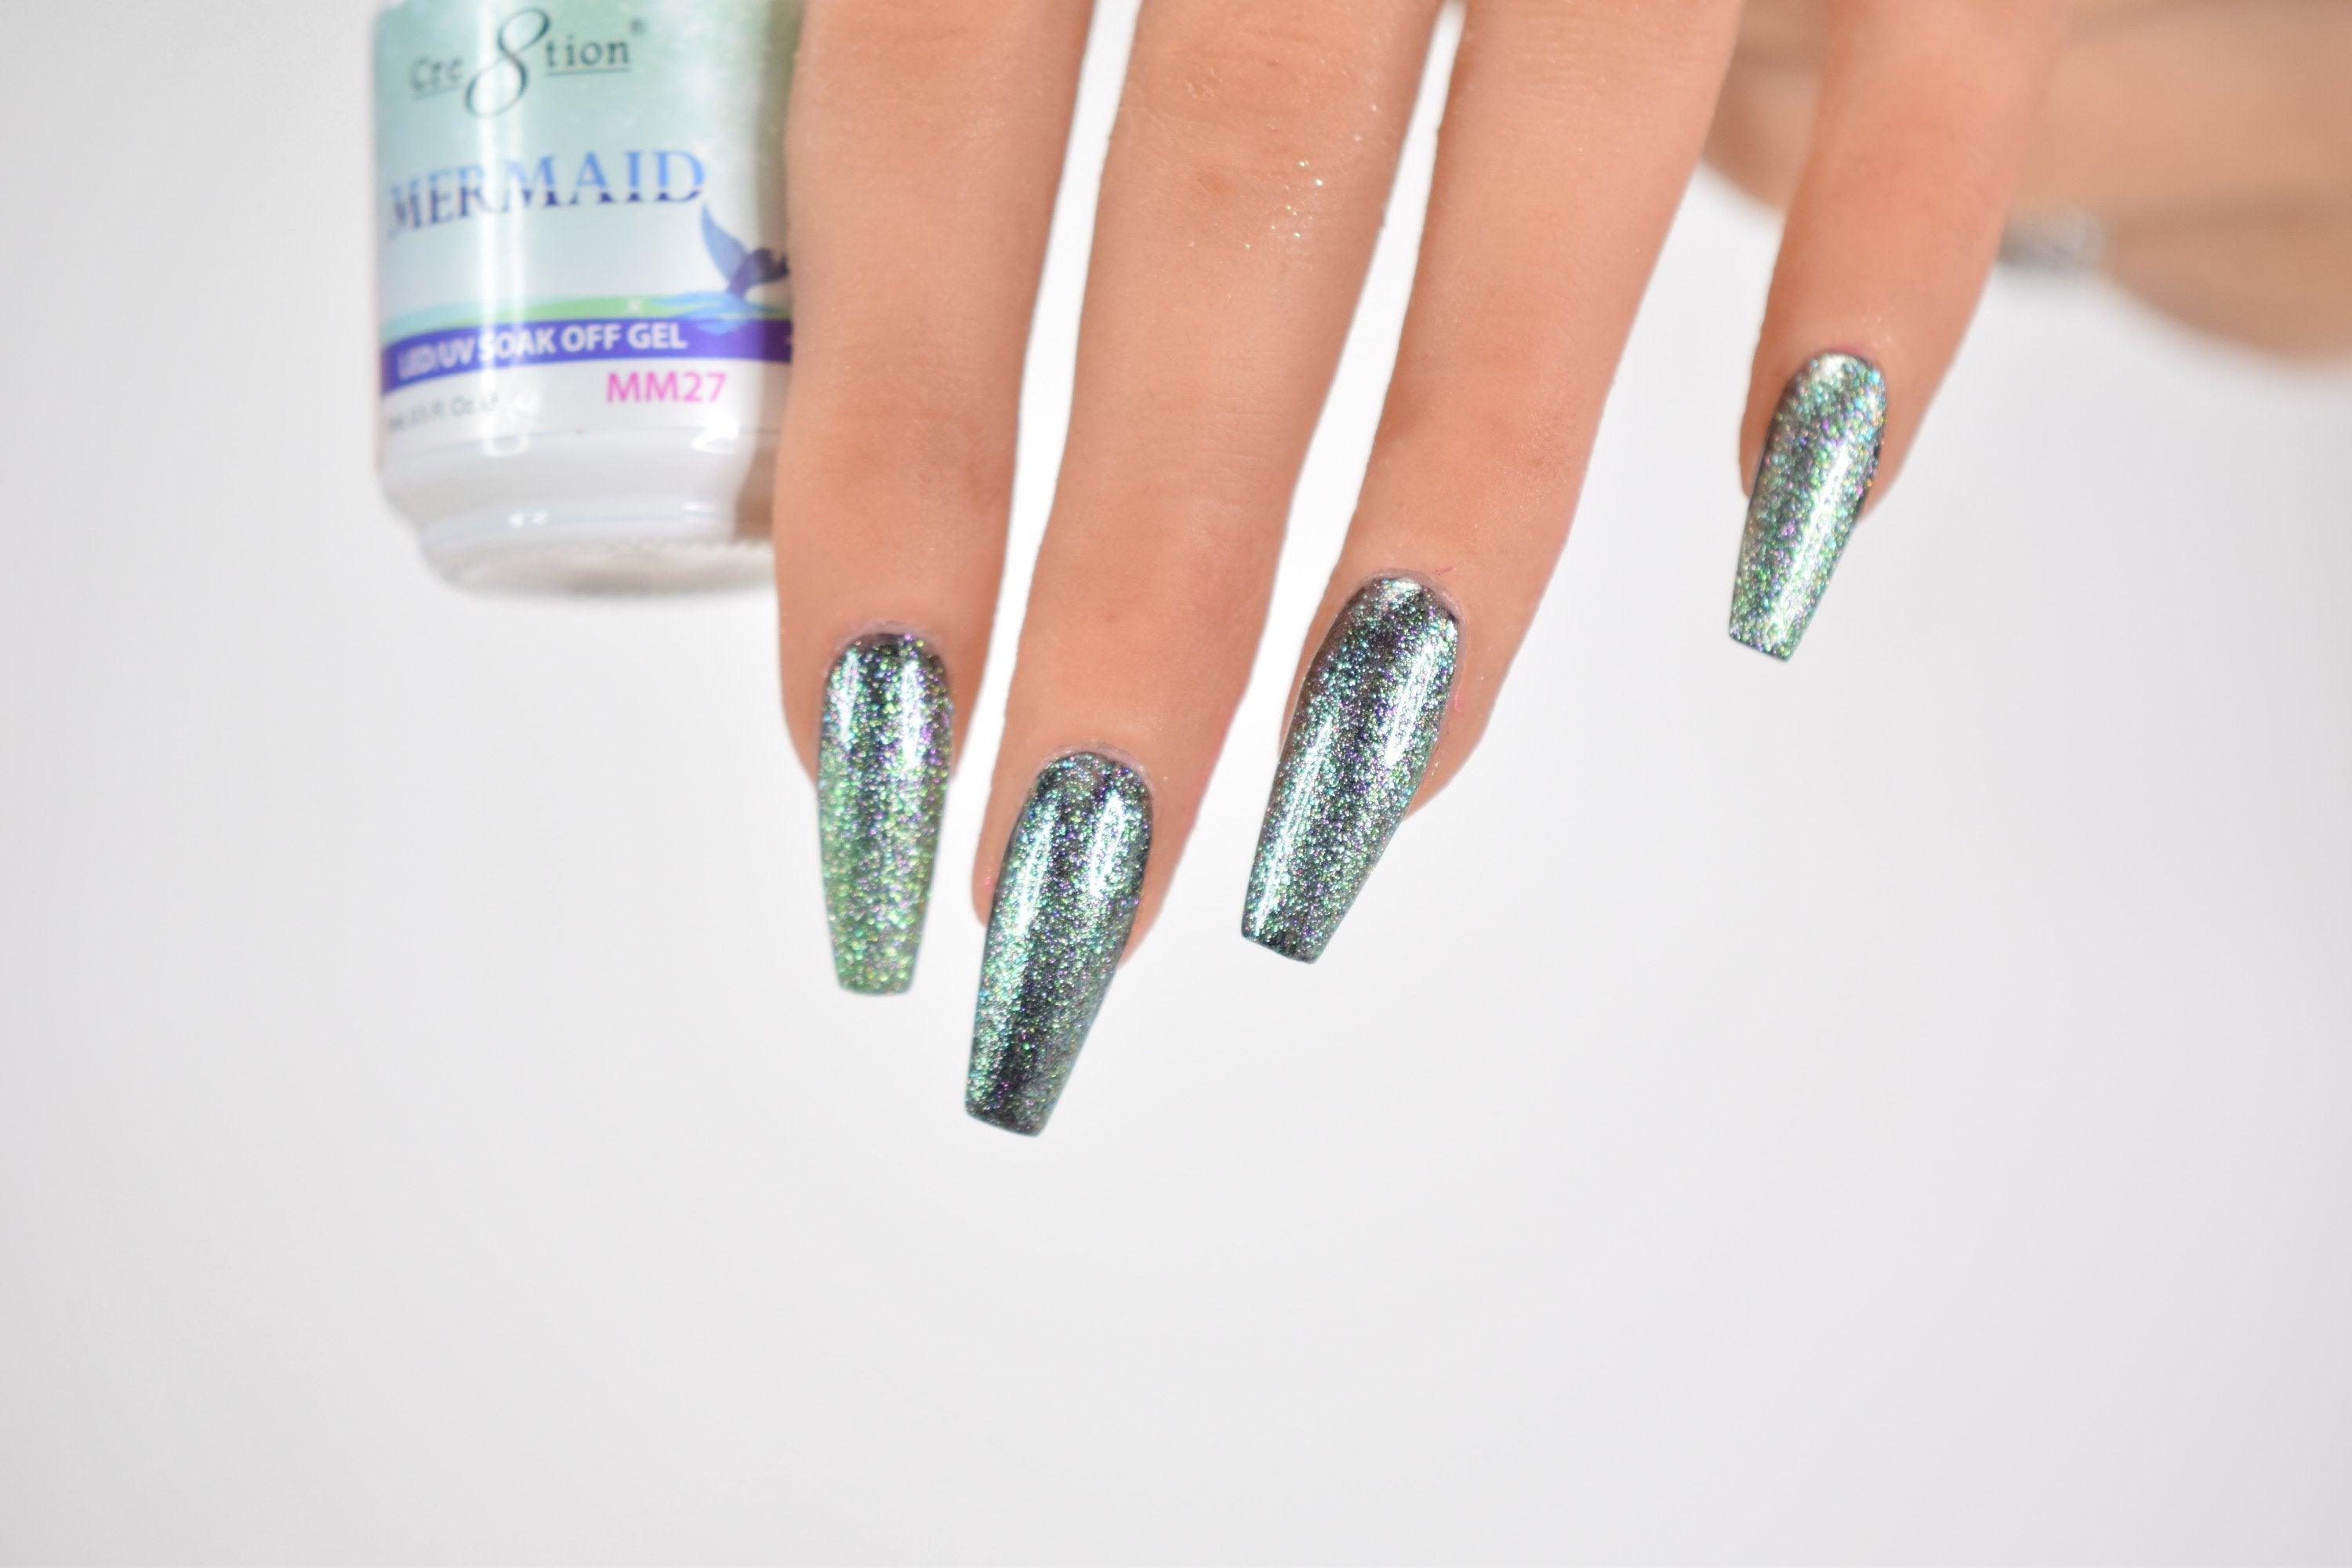 Cre8tion Soak Off Gel - Mermaid Collection #27